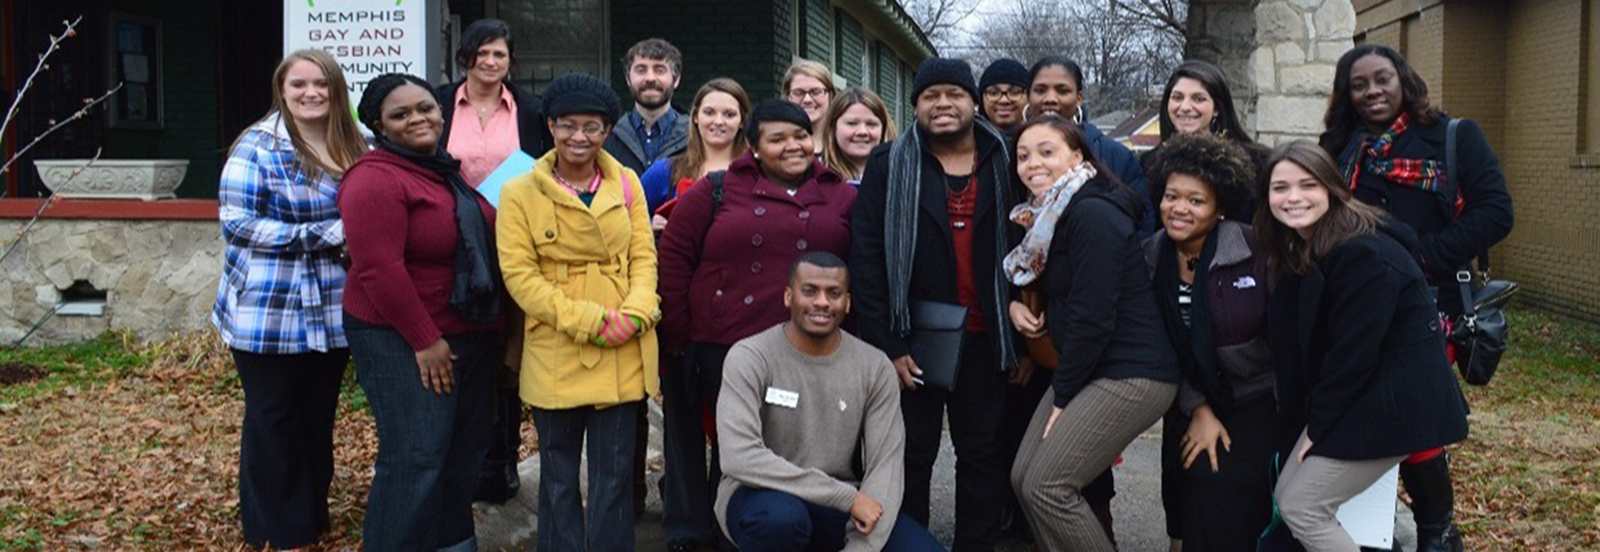 Social Work students outside the Memphis Gay and Lesbian Community Center